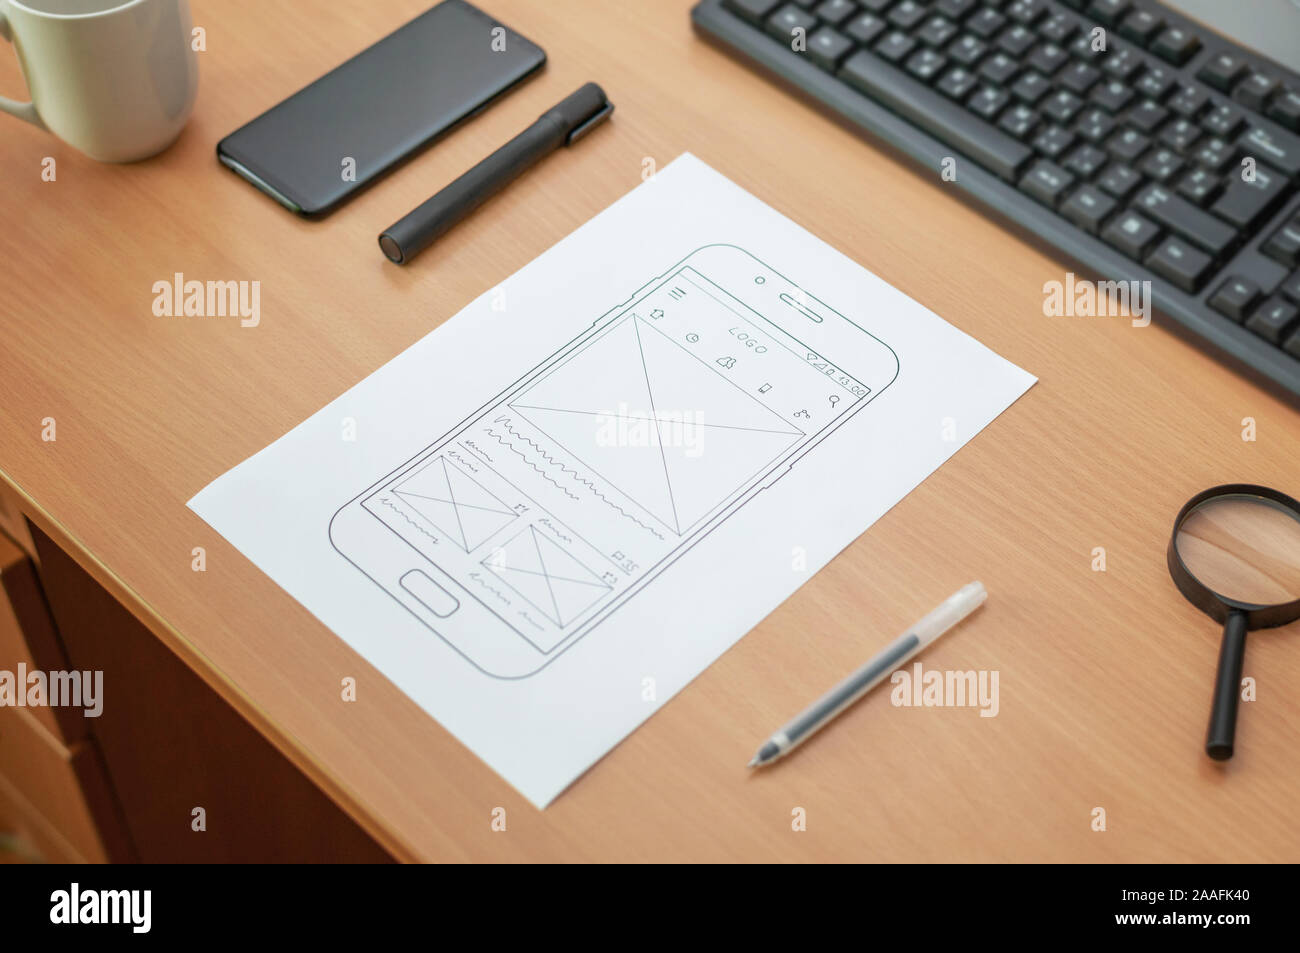 Sketch of a website or mobile phone app on wireframe. Paper on work desk. Keyobard, phone, pen, coffee and magnifier beside. Close up. Stock Photo